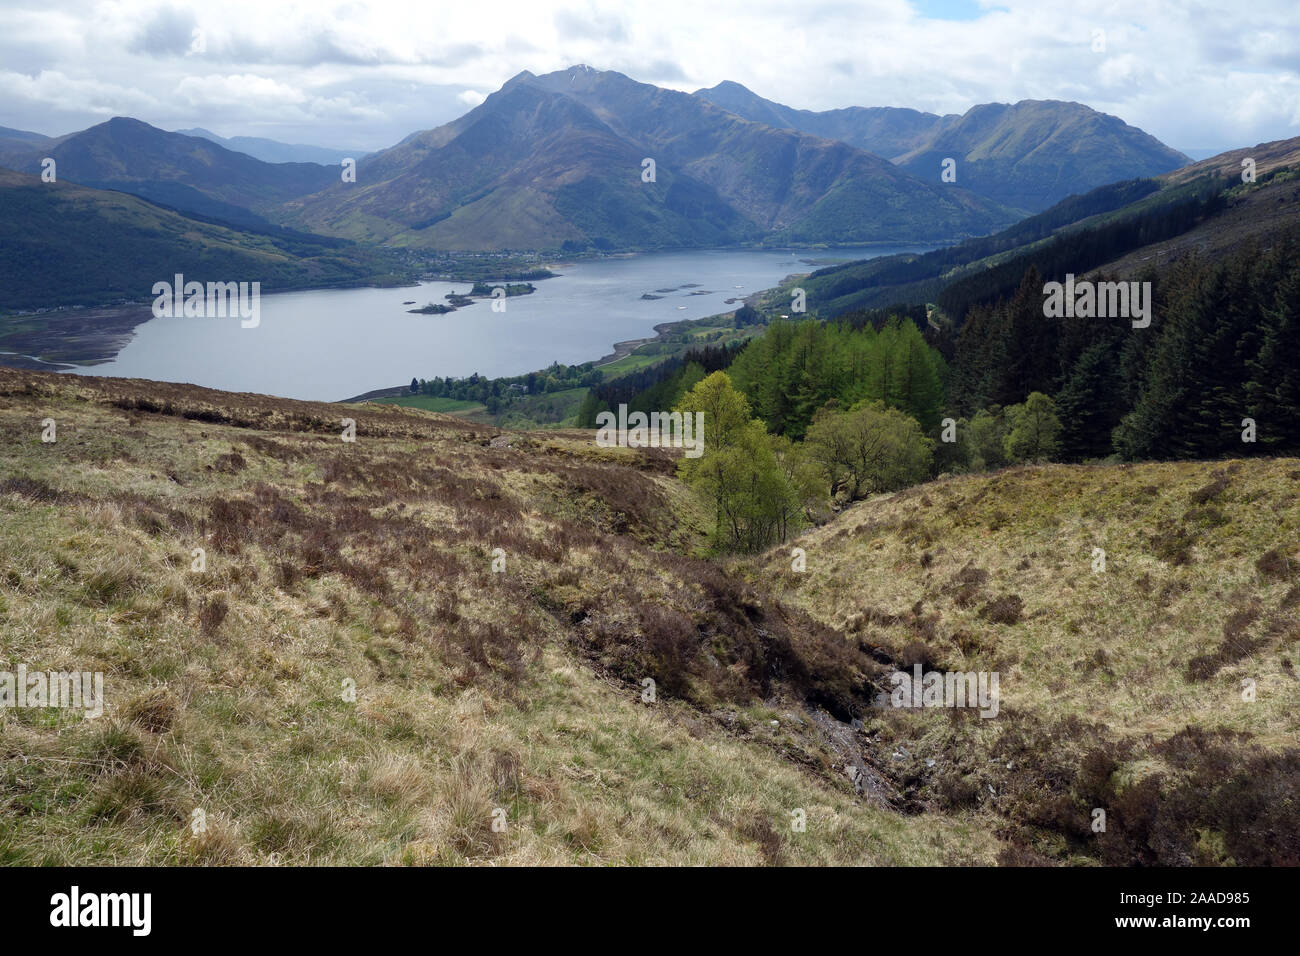 The Munros on Scottish Mountain Range of Beinn a' Bheithir & Loch Leven from the Hill Path from Callert House, Scottish Highlands, Scotland, UK. Stock Photo